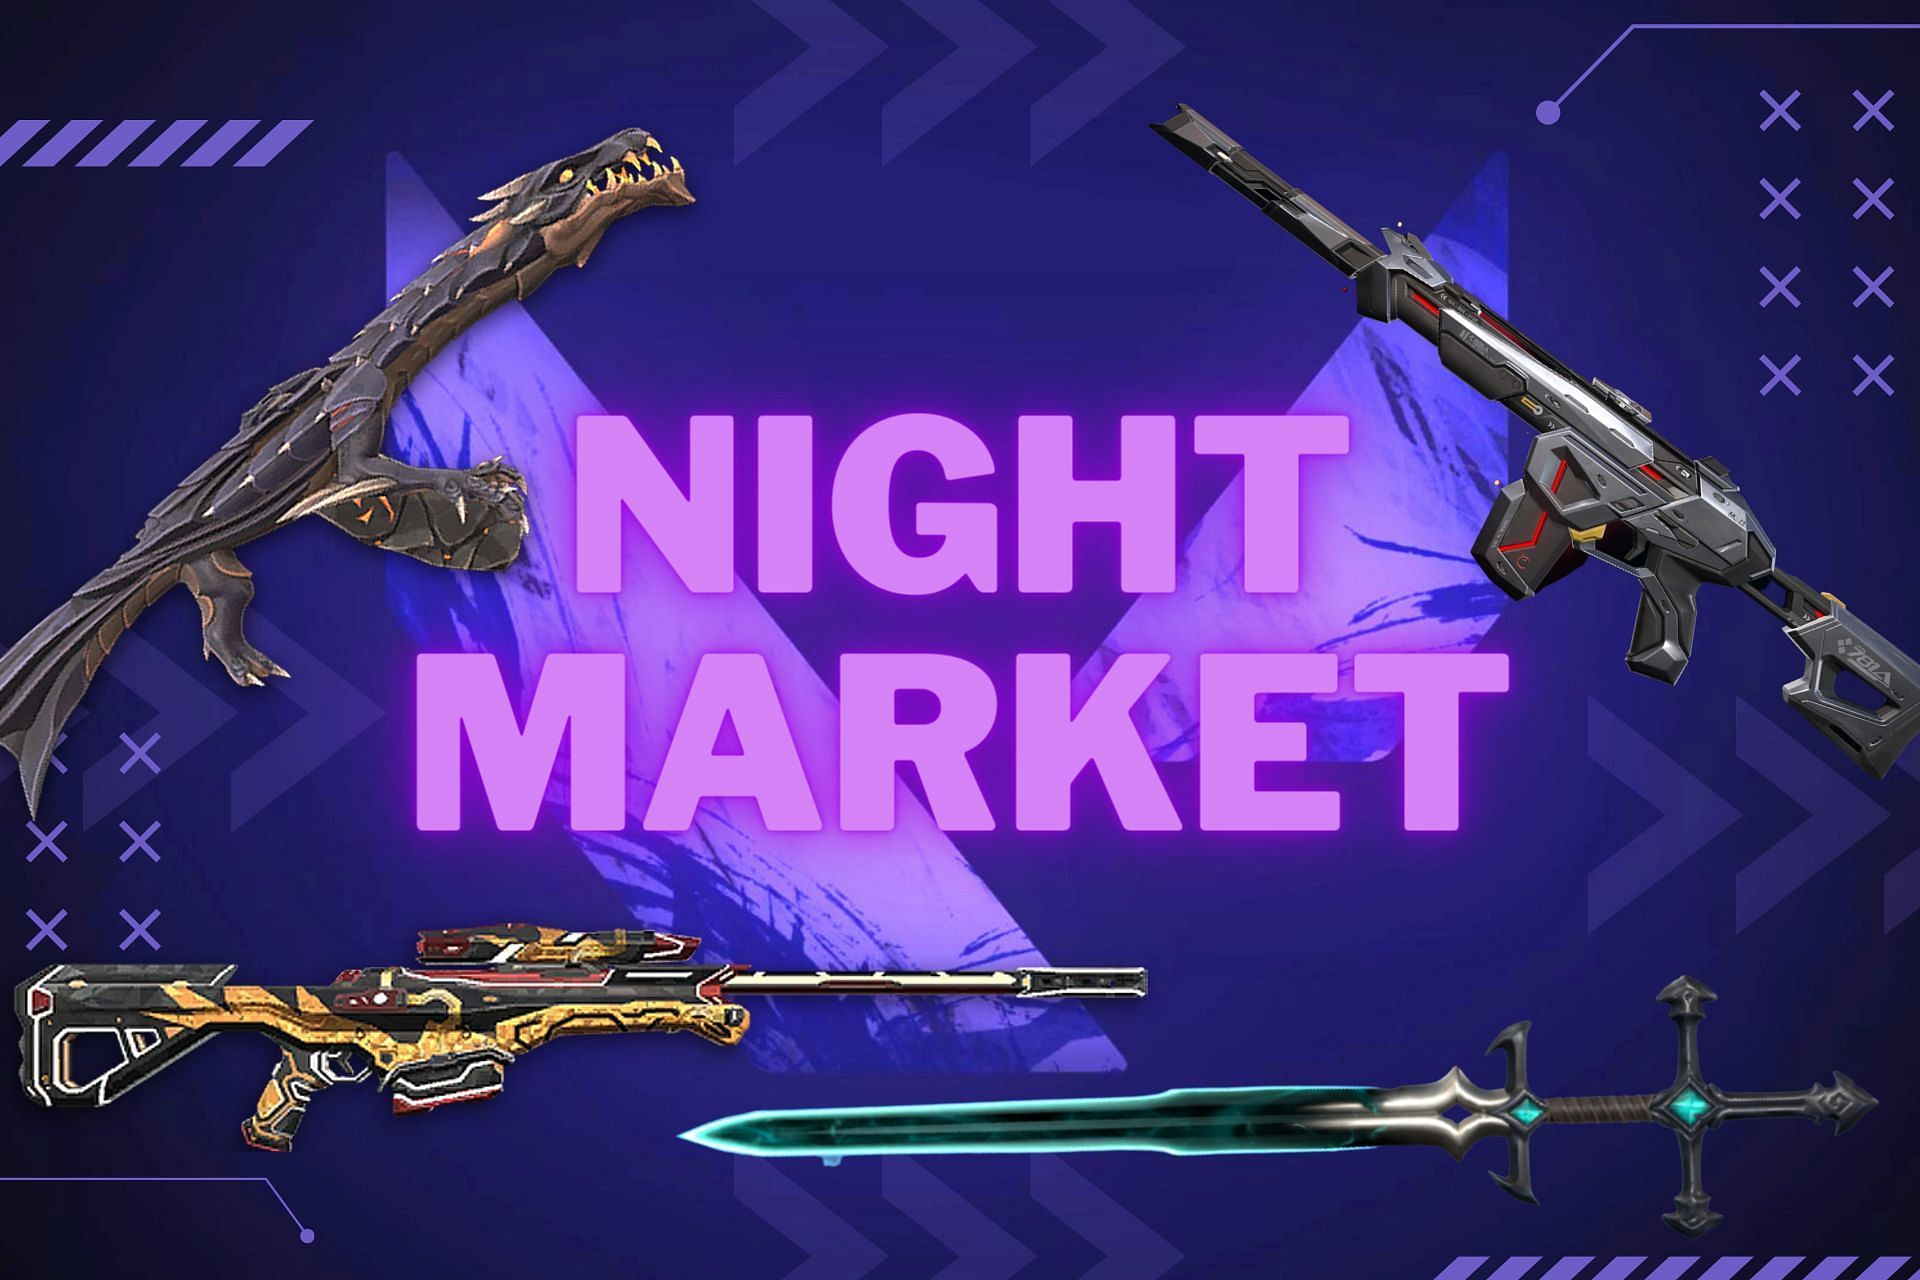 The Night Market is the perfect place to acquire weapon skins at low prices (Image via Sportskeeda)